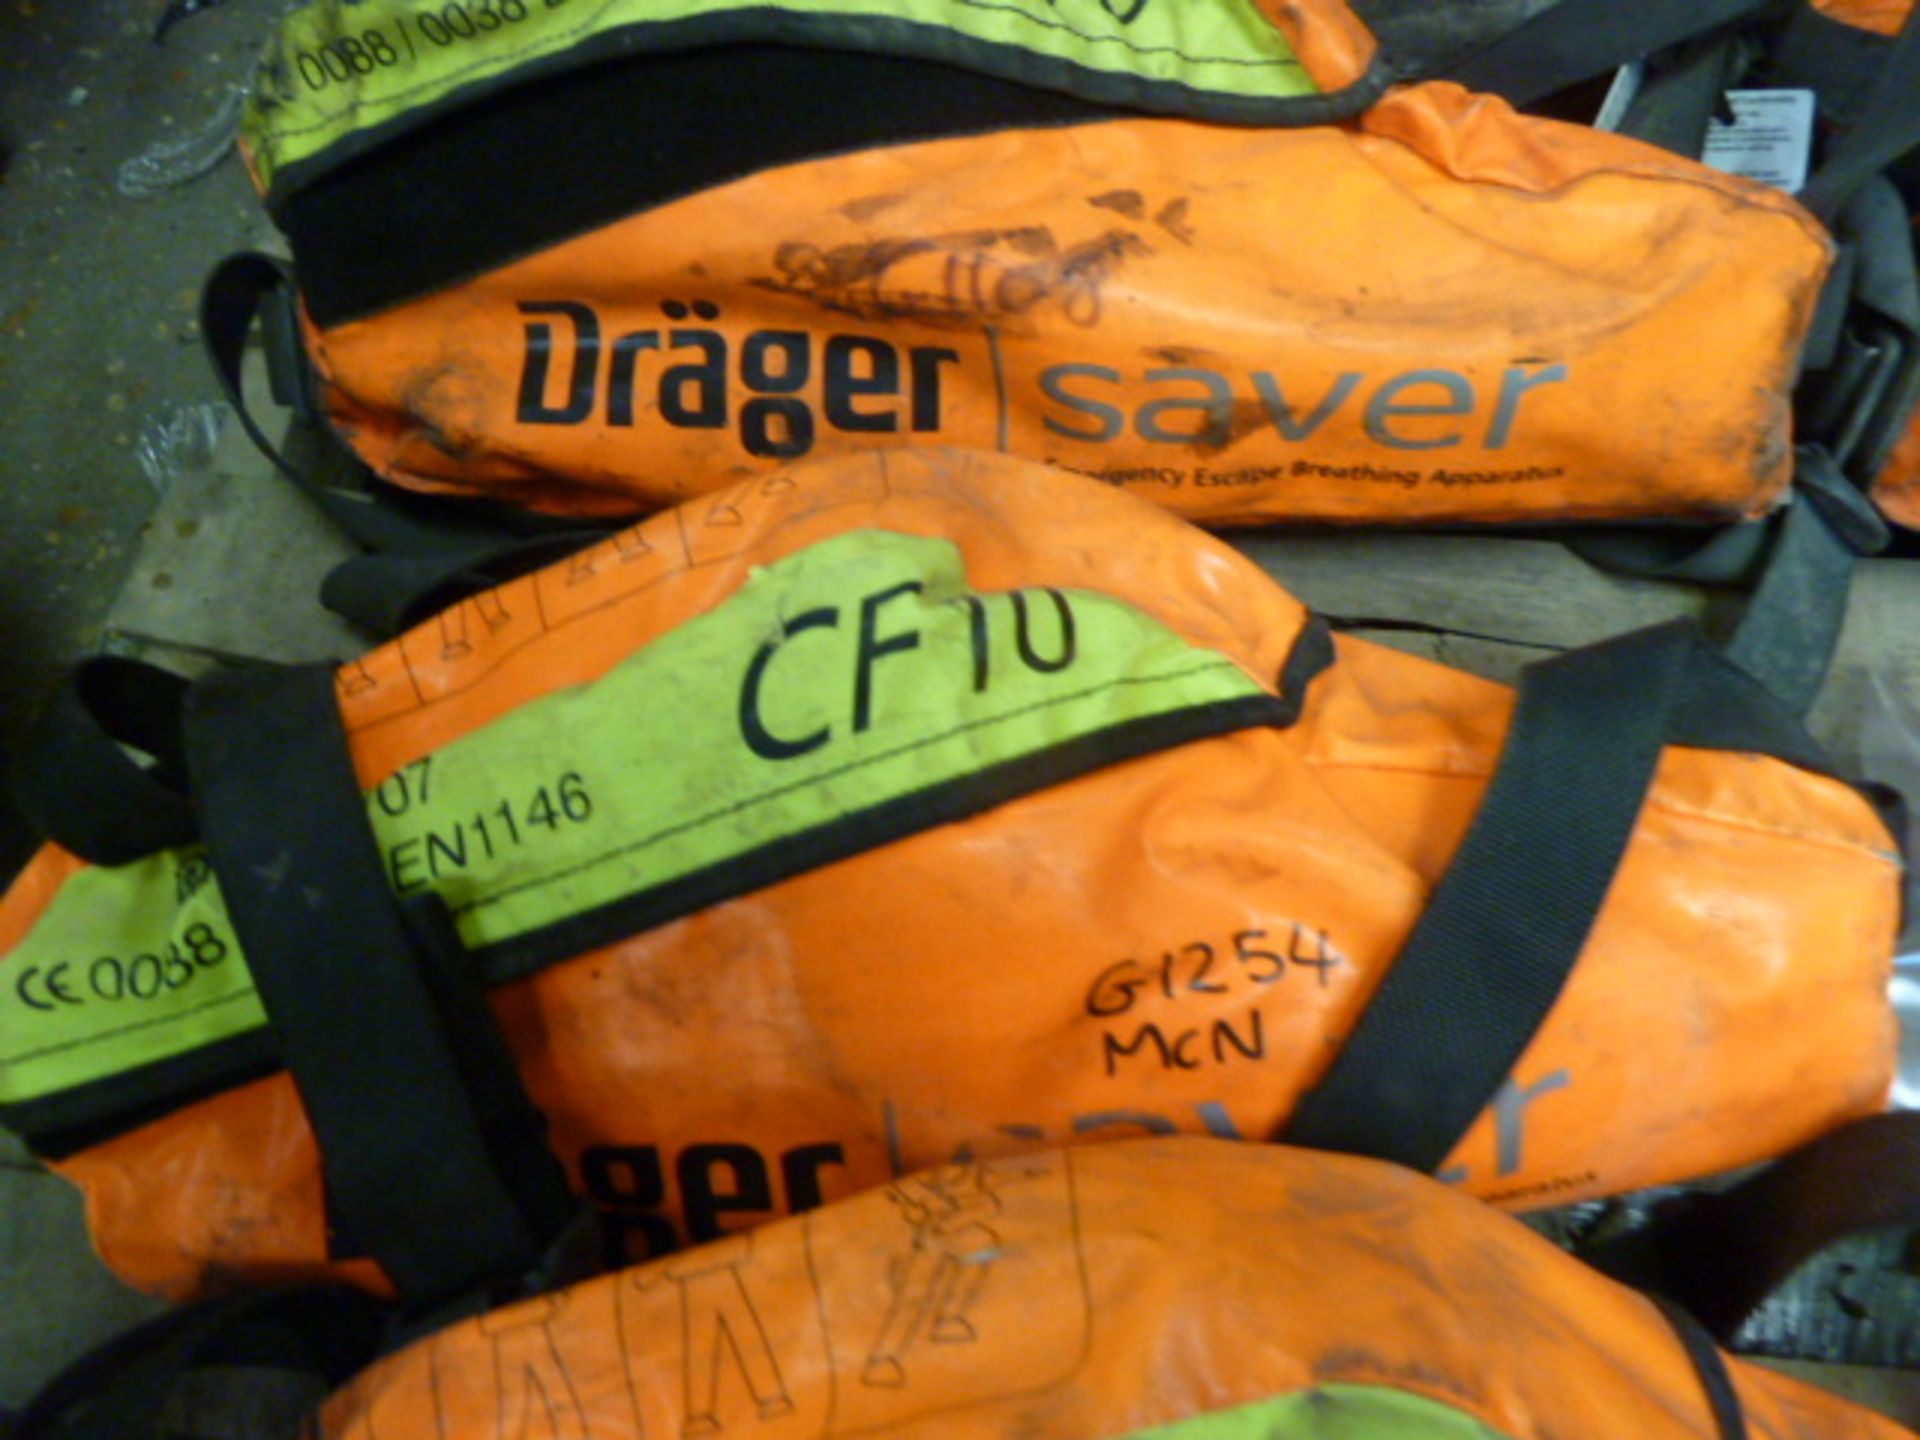 Drager CF10 emergency escape breathing apparatus with no certification